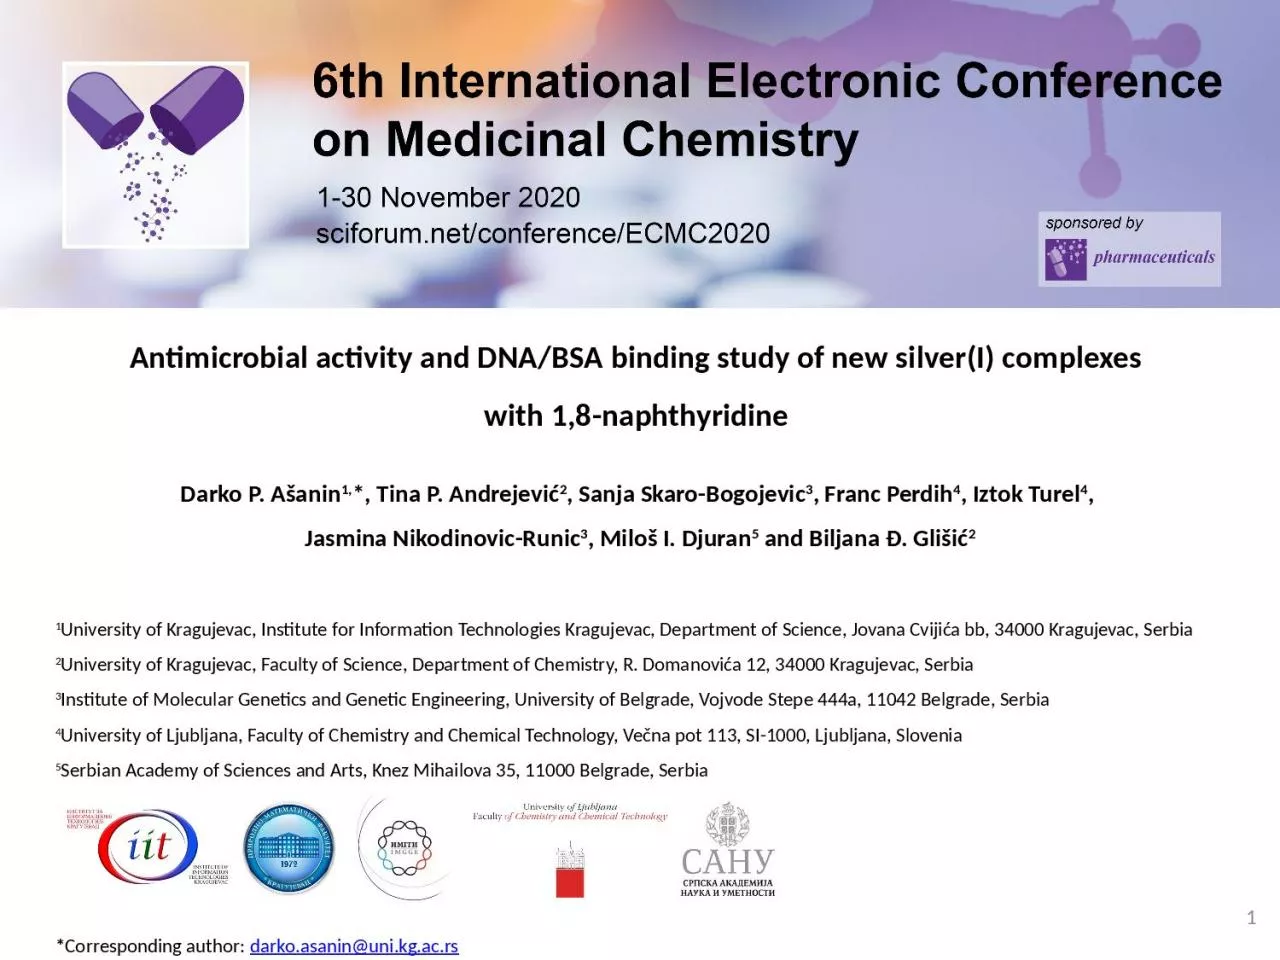 Antimicrobial activity and DNA/BSA binding study of new silver(I) complexes